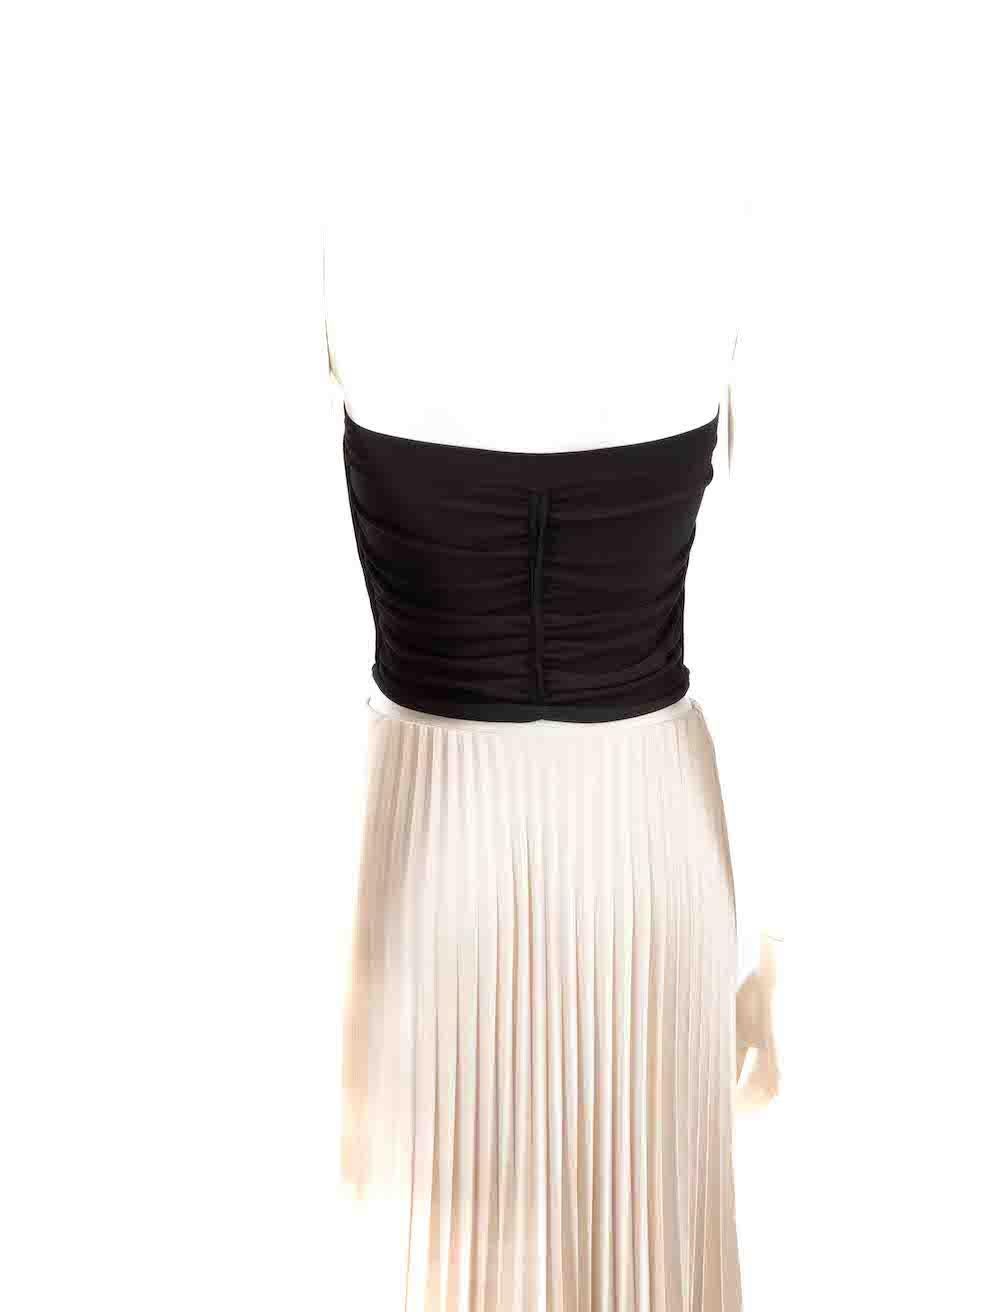 Alexander Wang Black Ruched Tube Top Size M In New Condition For Sale In London, GB